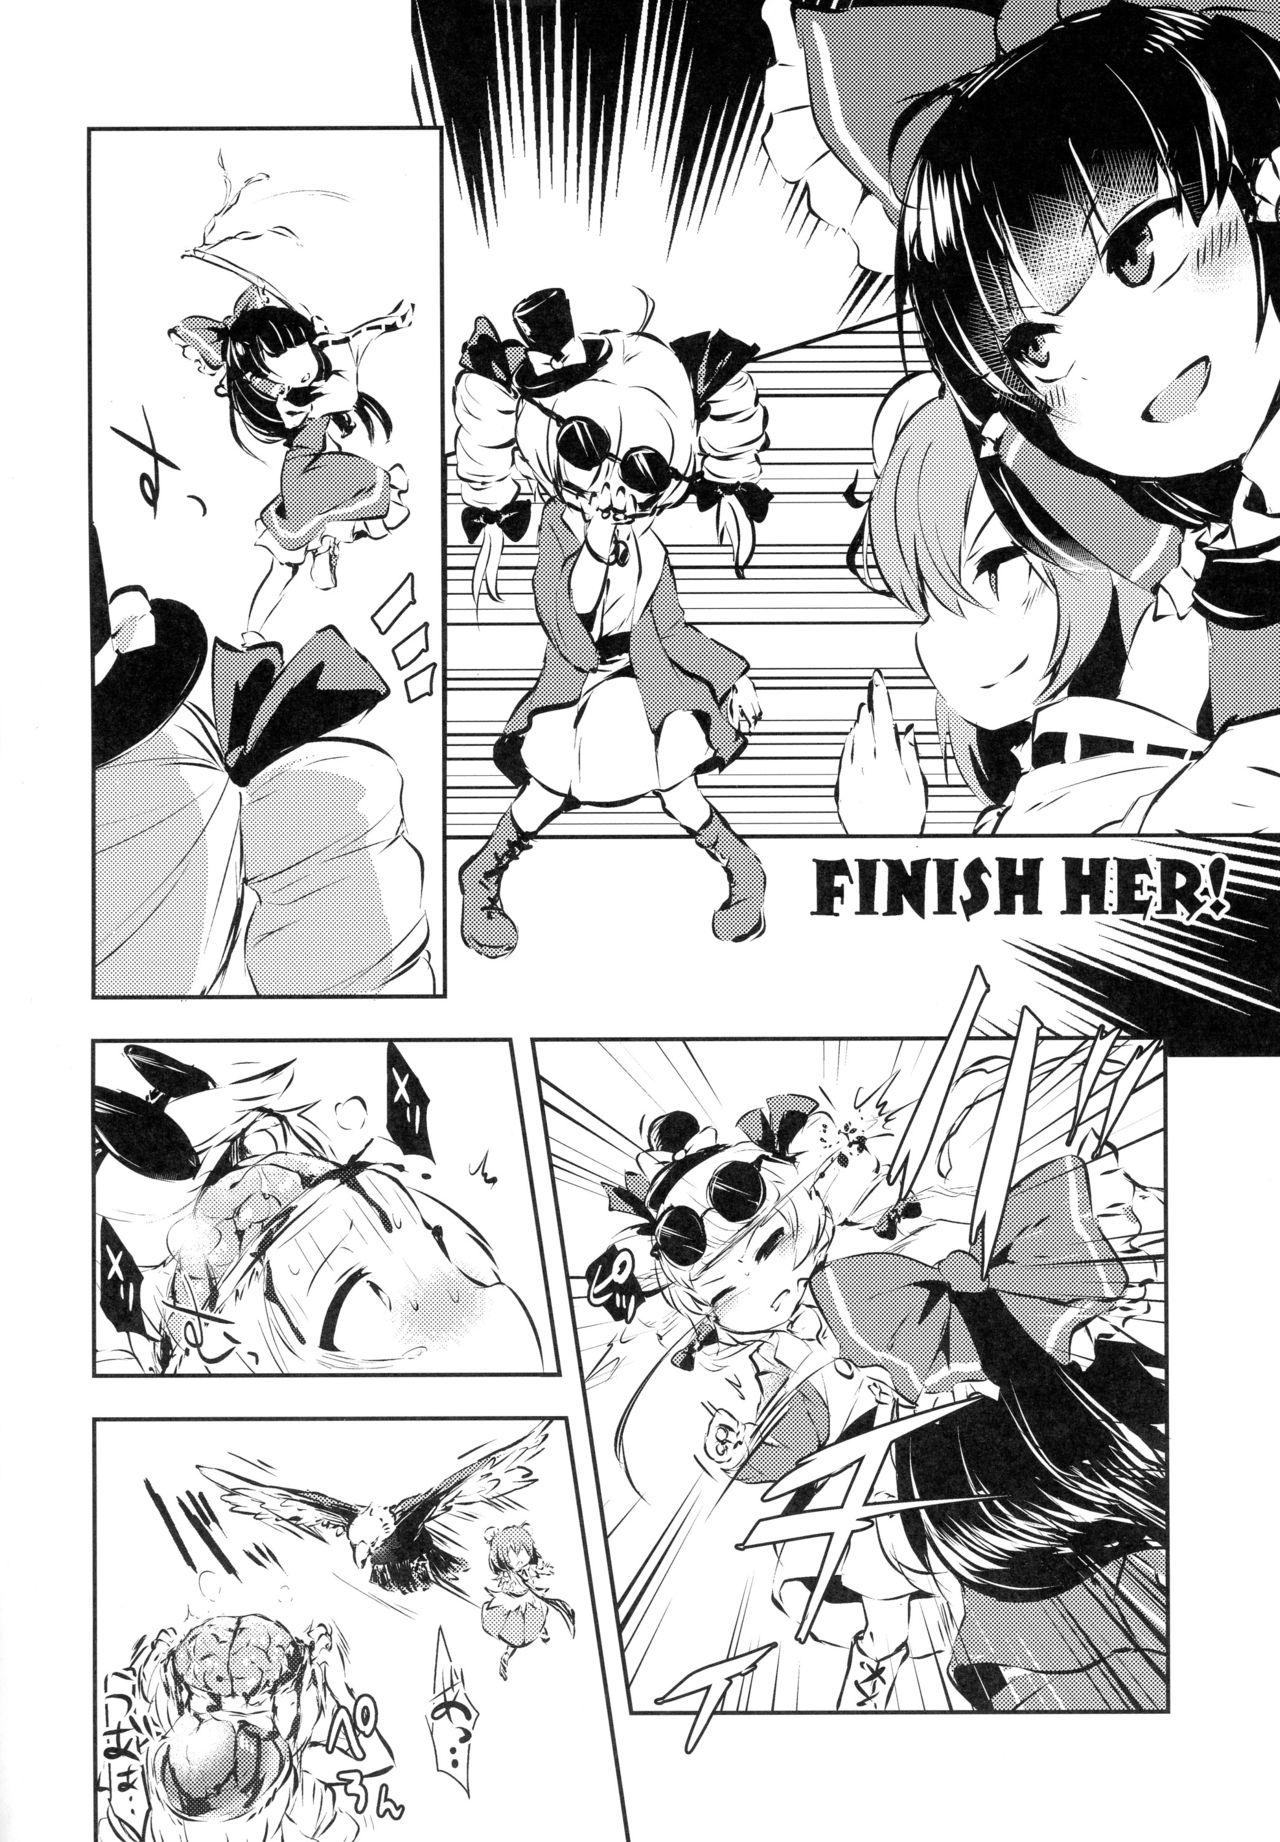 Bro AURA POSSESSION'S FATALITIES - Touhou project Hermana - Page 4